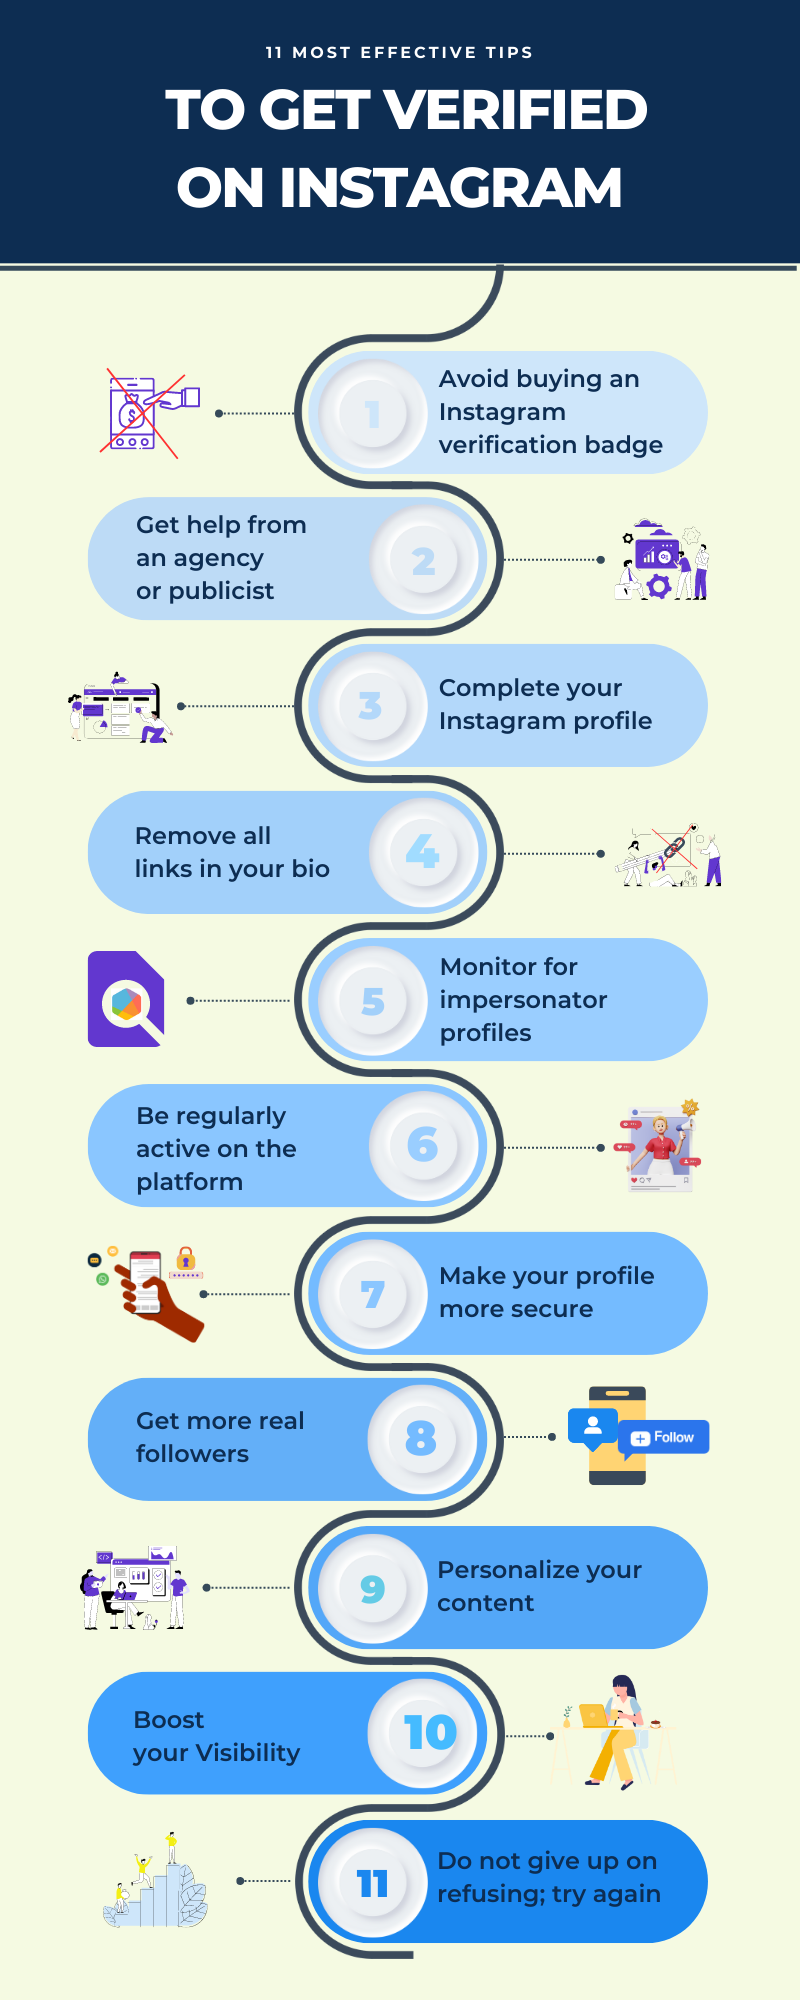 11 Most Effective Tips to get verified on Instagram